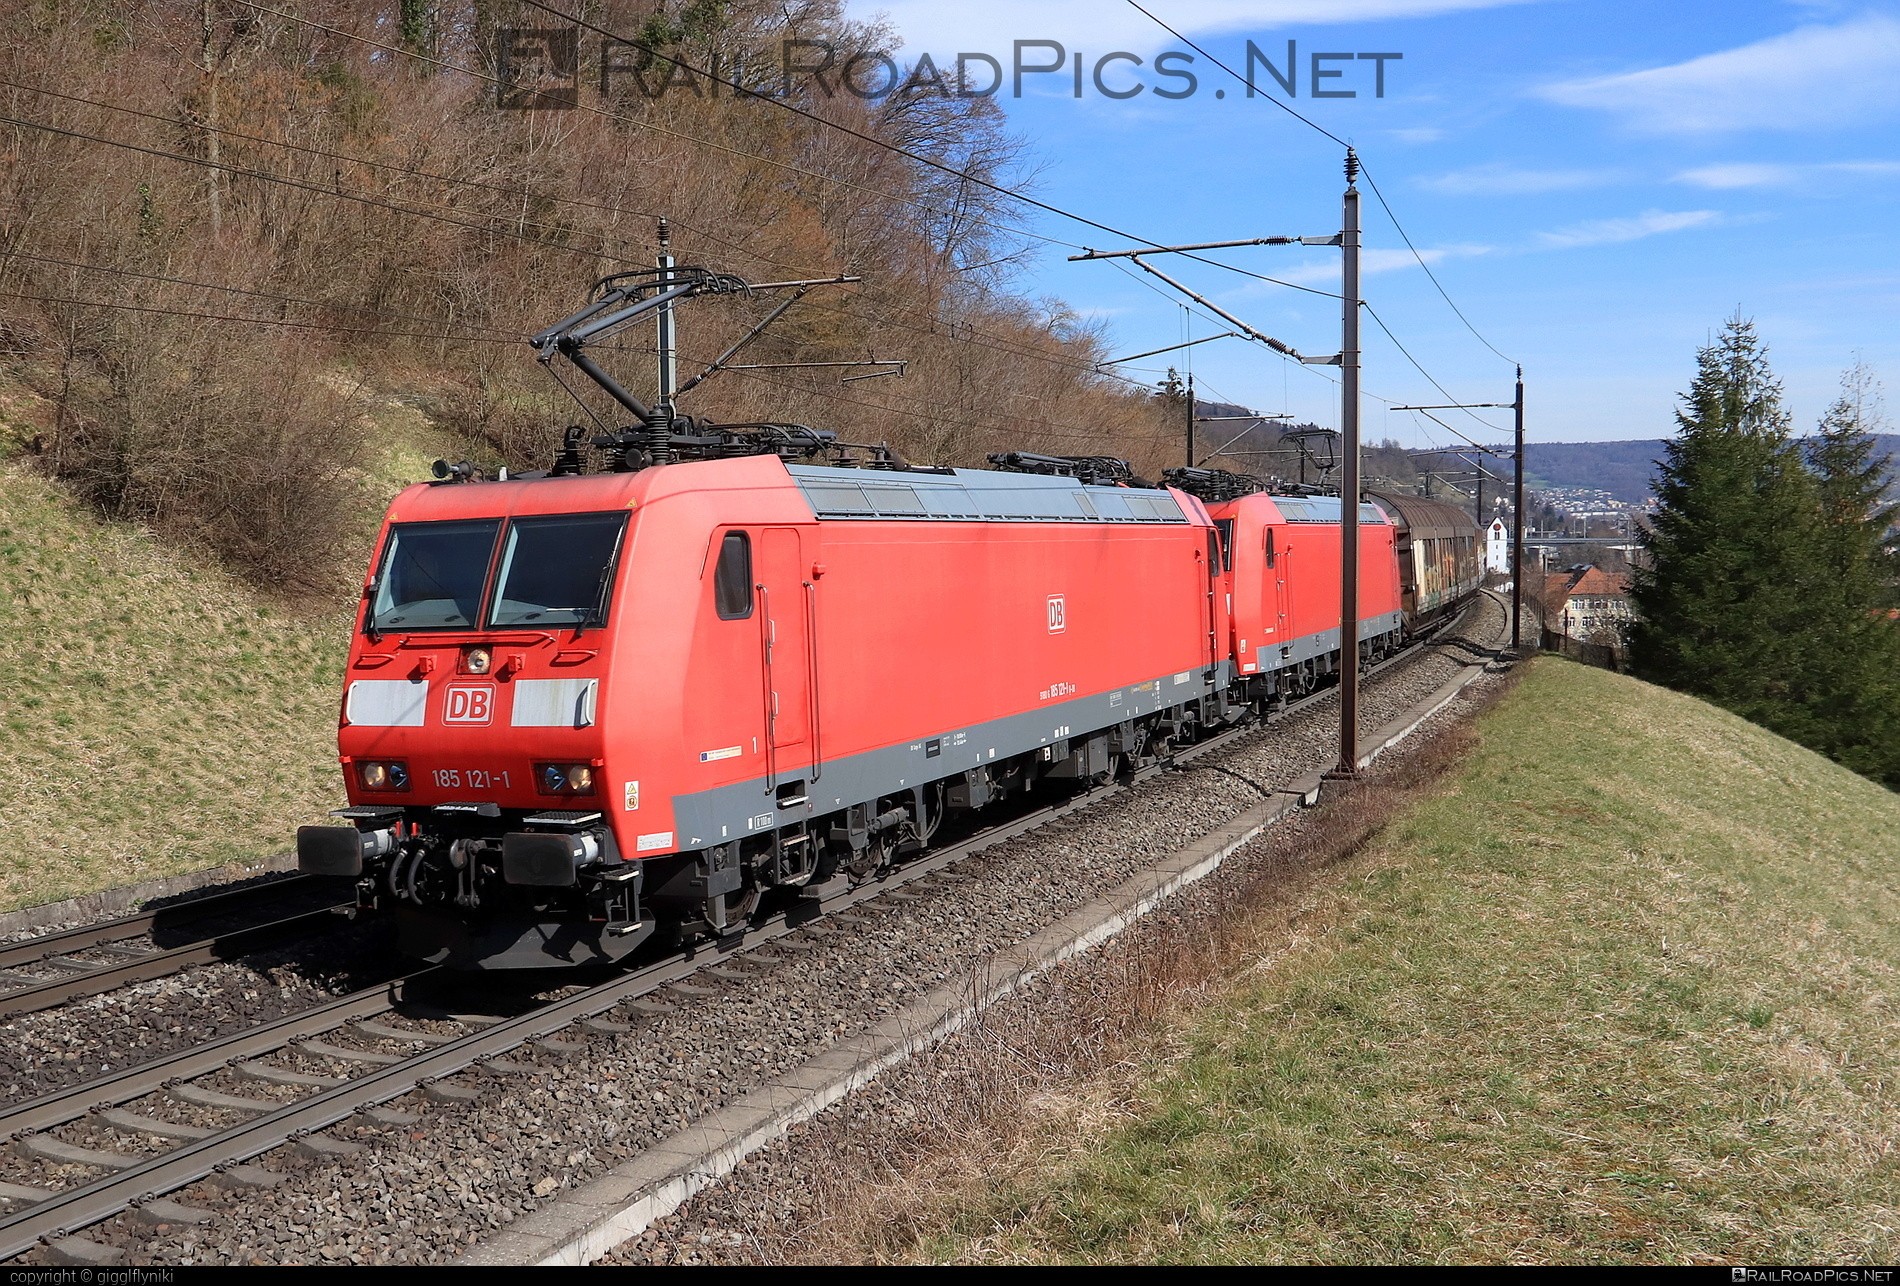 Bombardier TRAXX F140 AC1 - 185 121-1 operated by DB Cargo AG #bombardier #bombardiertraxx #db #dbcargo #dbcargoag #deutschebahn #traxx #traxxf140 #traxxf140ac #traxxf140ac1